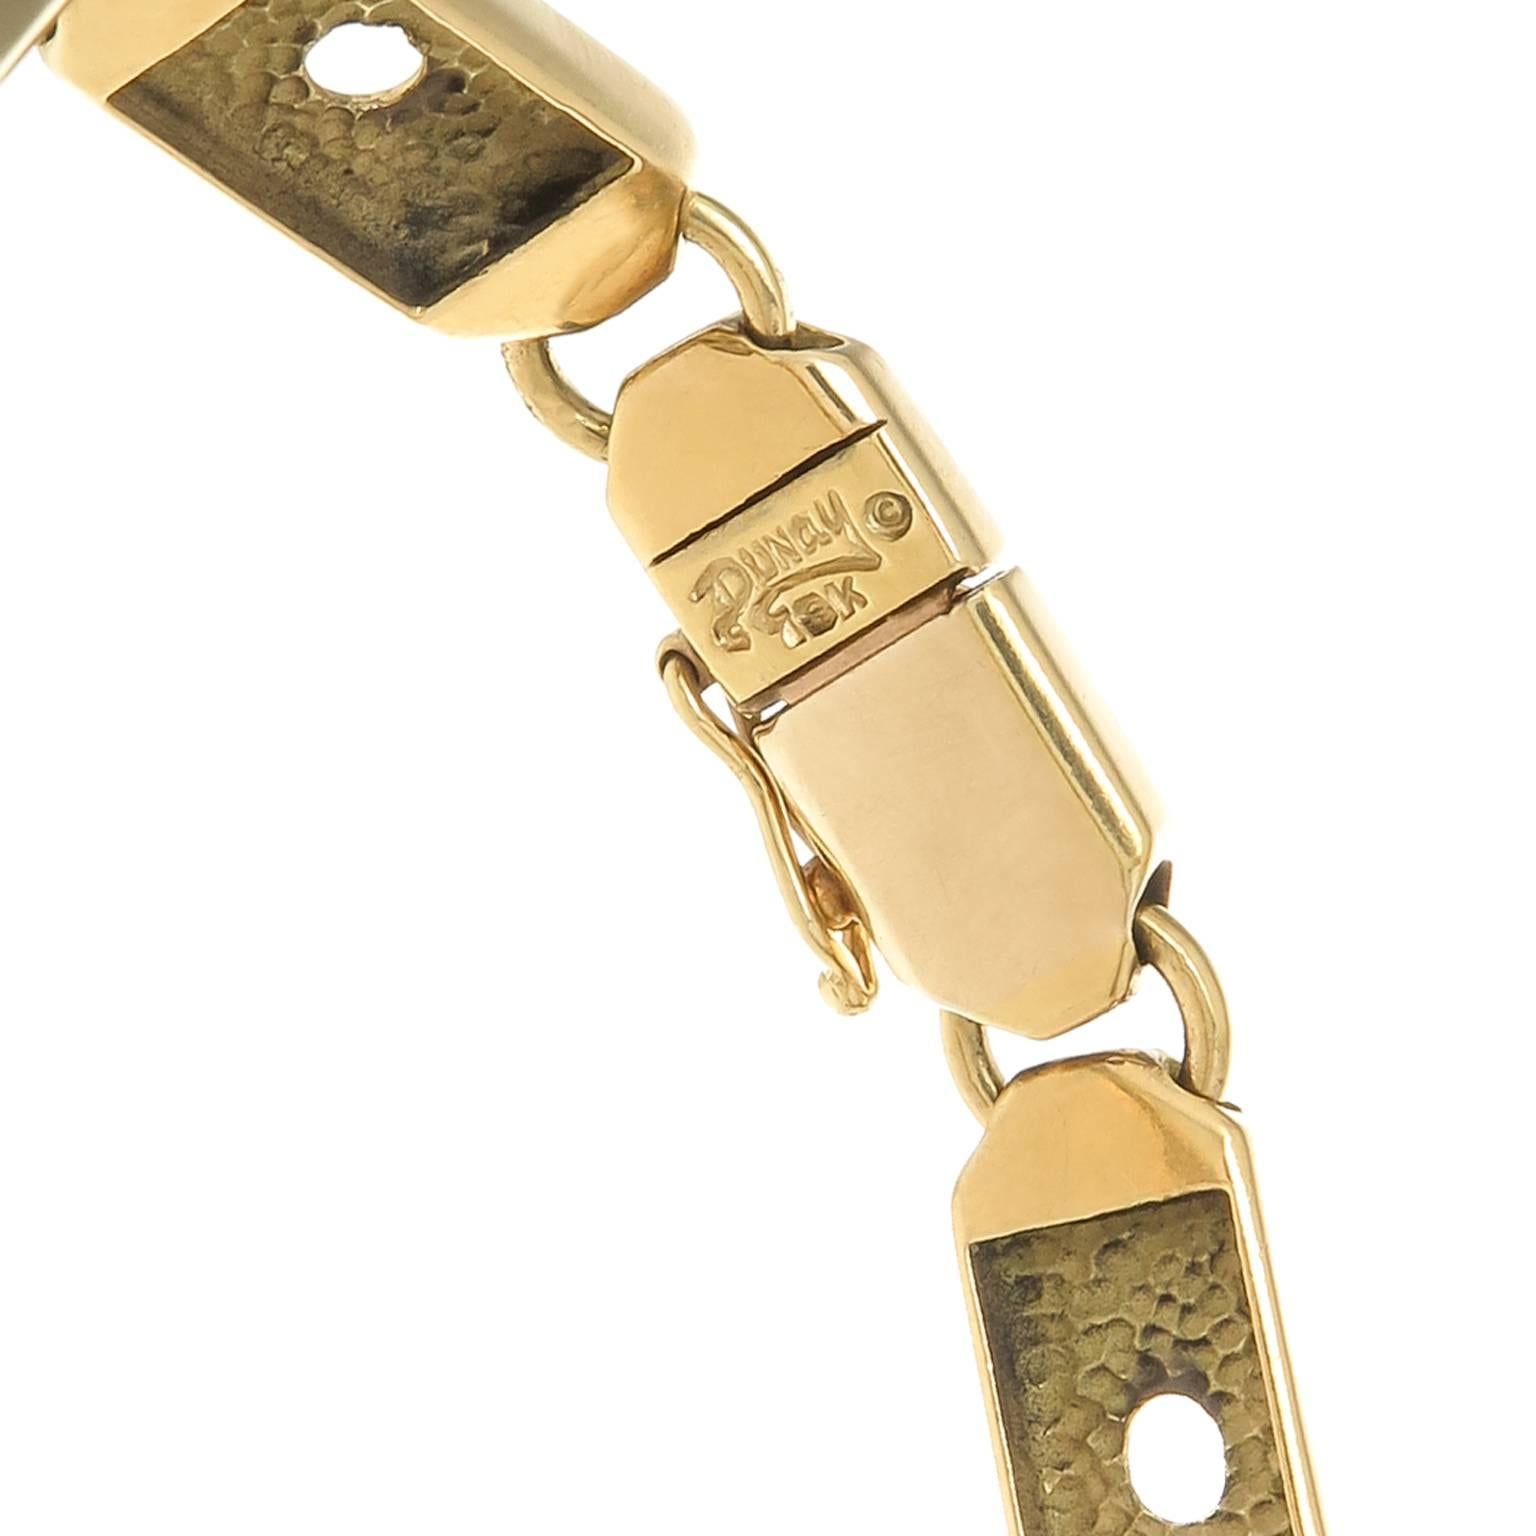 Circa 1980s Henry Dunay 18K Yellow Gold flexible link Bracelet, measuring 6 3/4 inch in length and 5/16 inch wide. The center of the bracelet spells out 